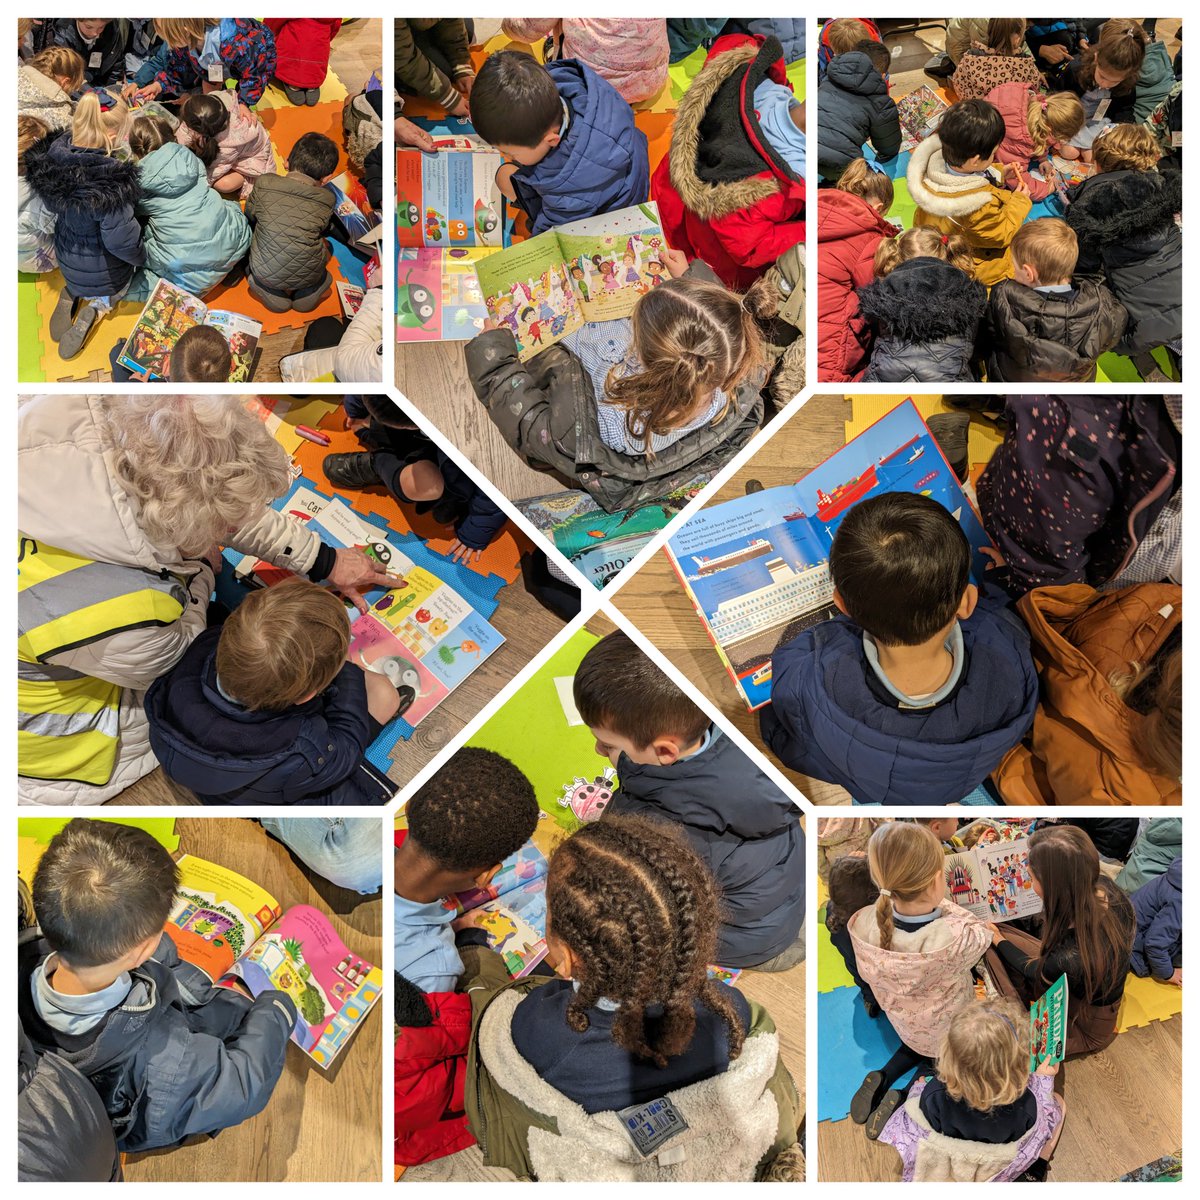 We've had a lovely week of visits from @StVincentsPr reception children! So lovely to share stories and talk about books with everyone - Rachael's had a lovely week!